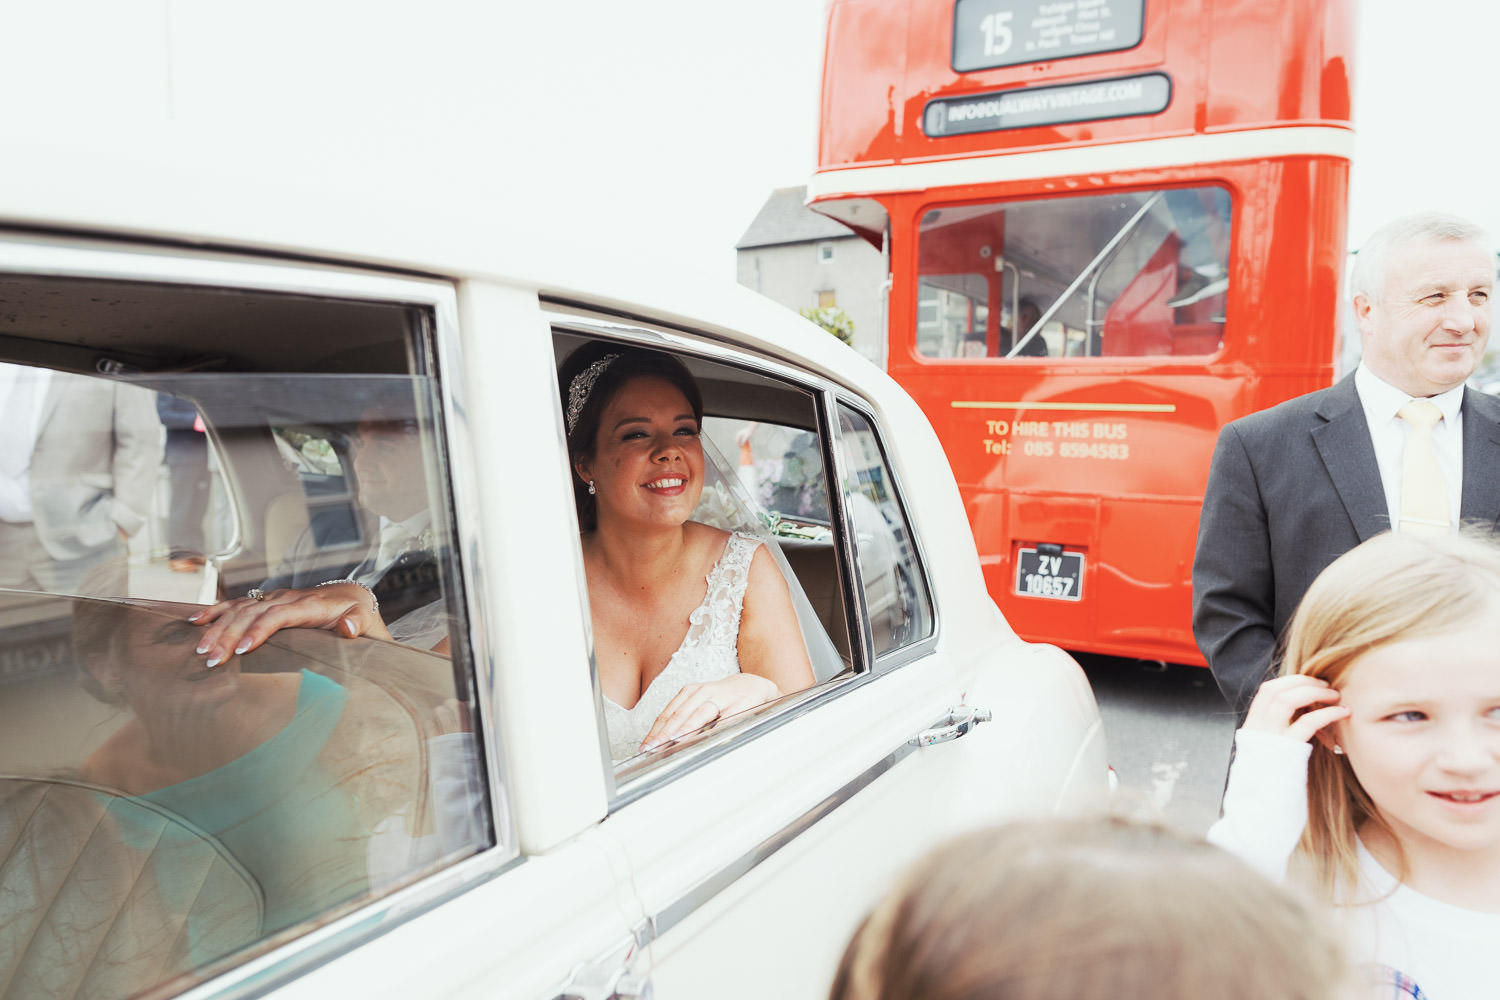 Bride looks out of the car window with a smile on her face, a young girl is putting her hair behind her ear.